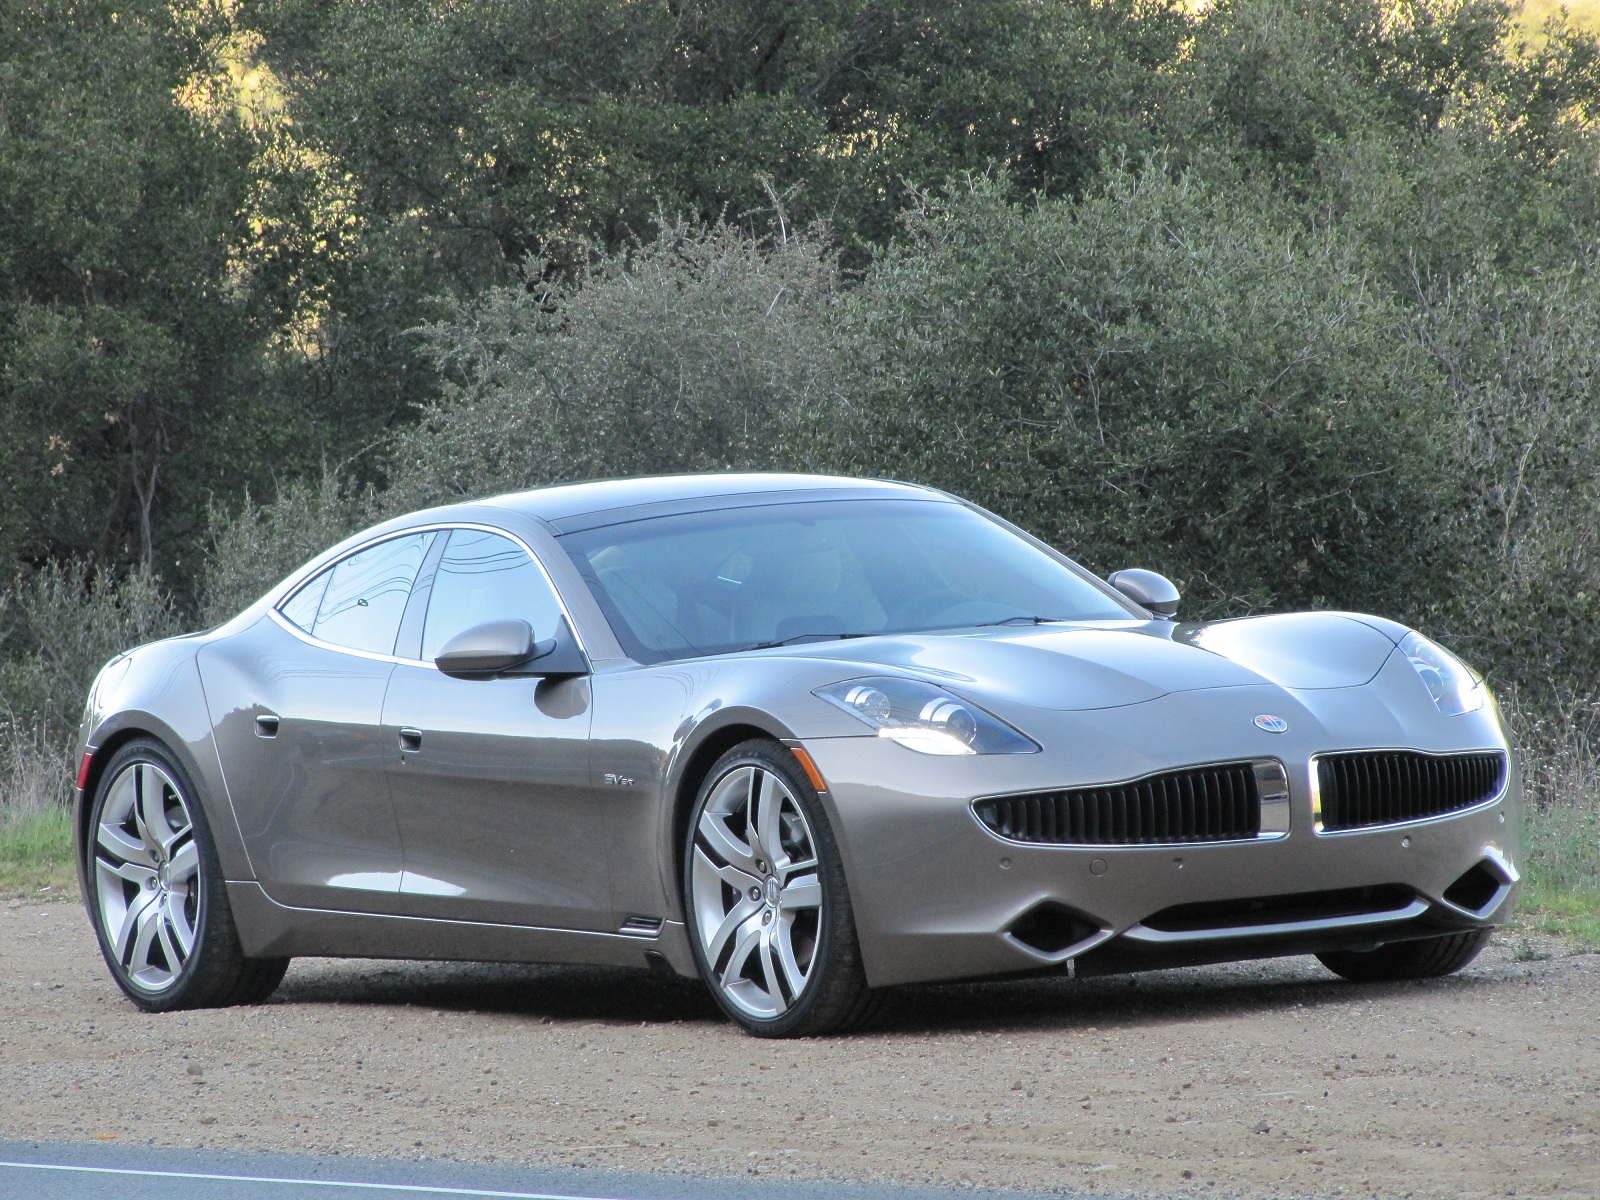 Was The 2012 Fisker Karma Released Before It Was Ready?